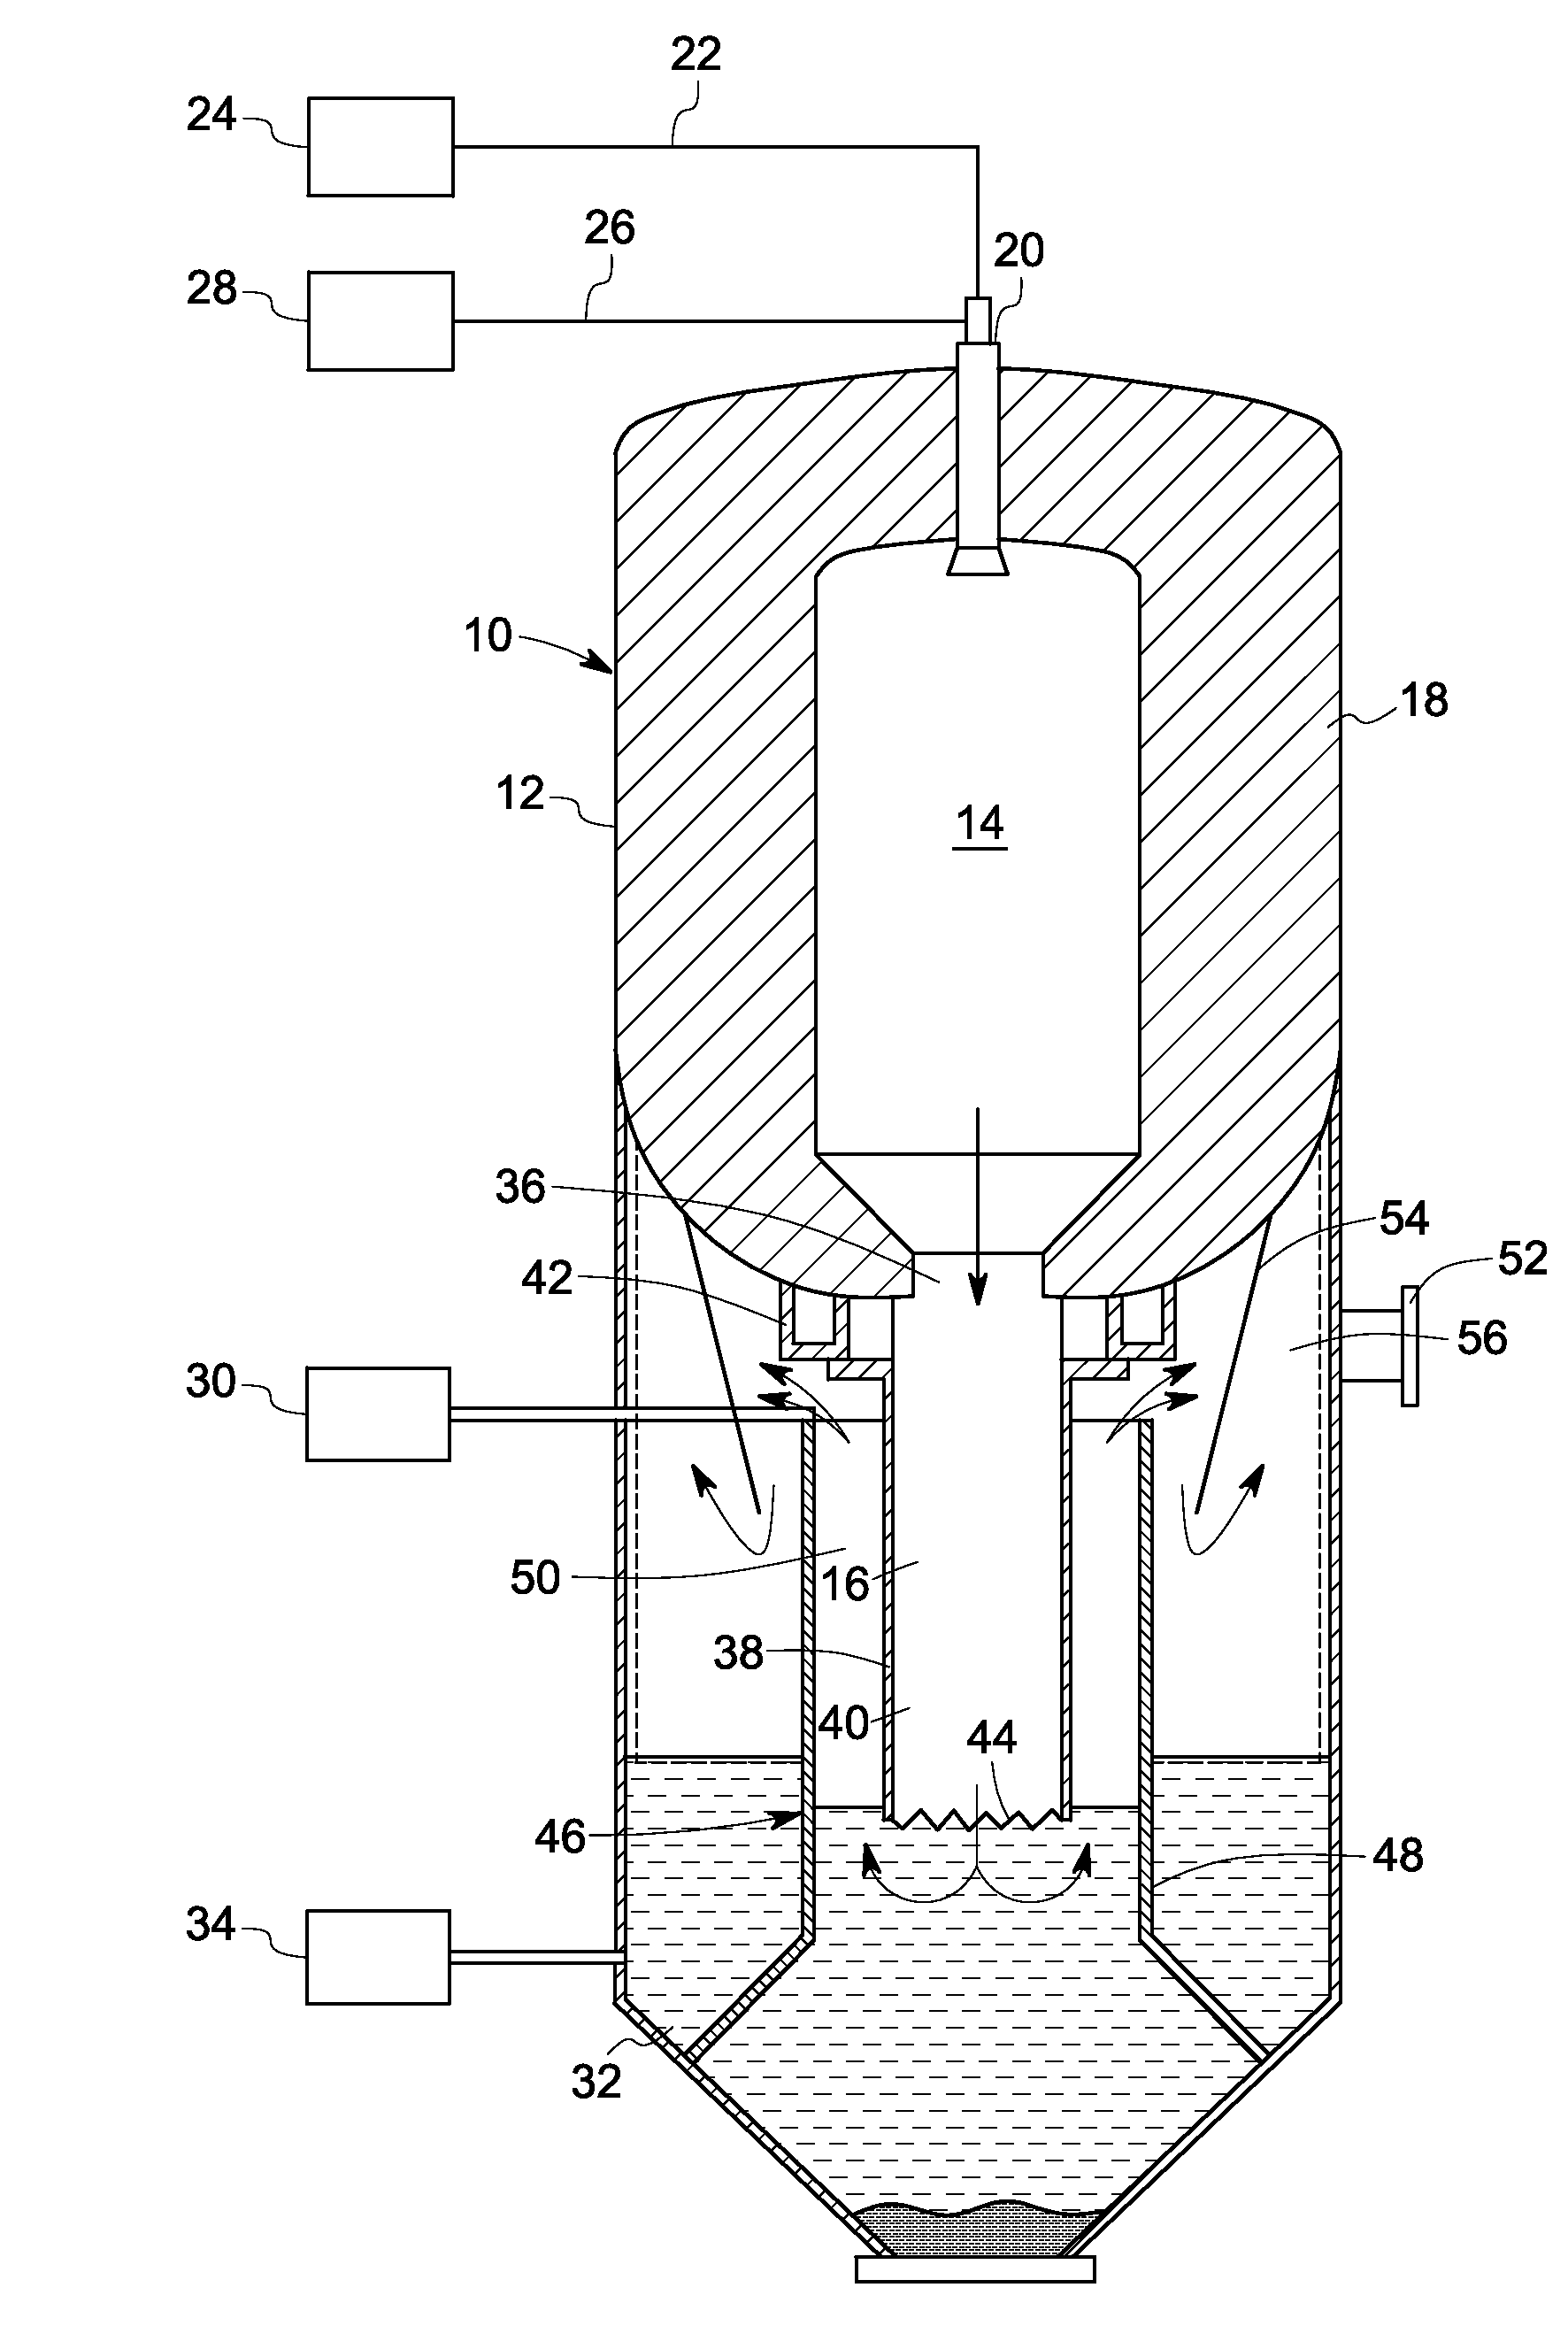 Quench chamber assembly for a gasifier